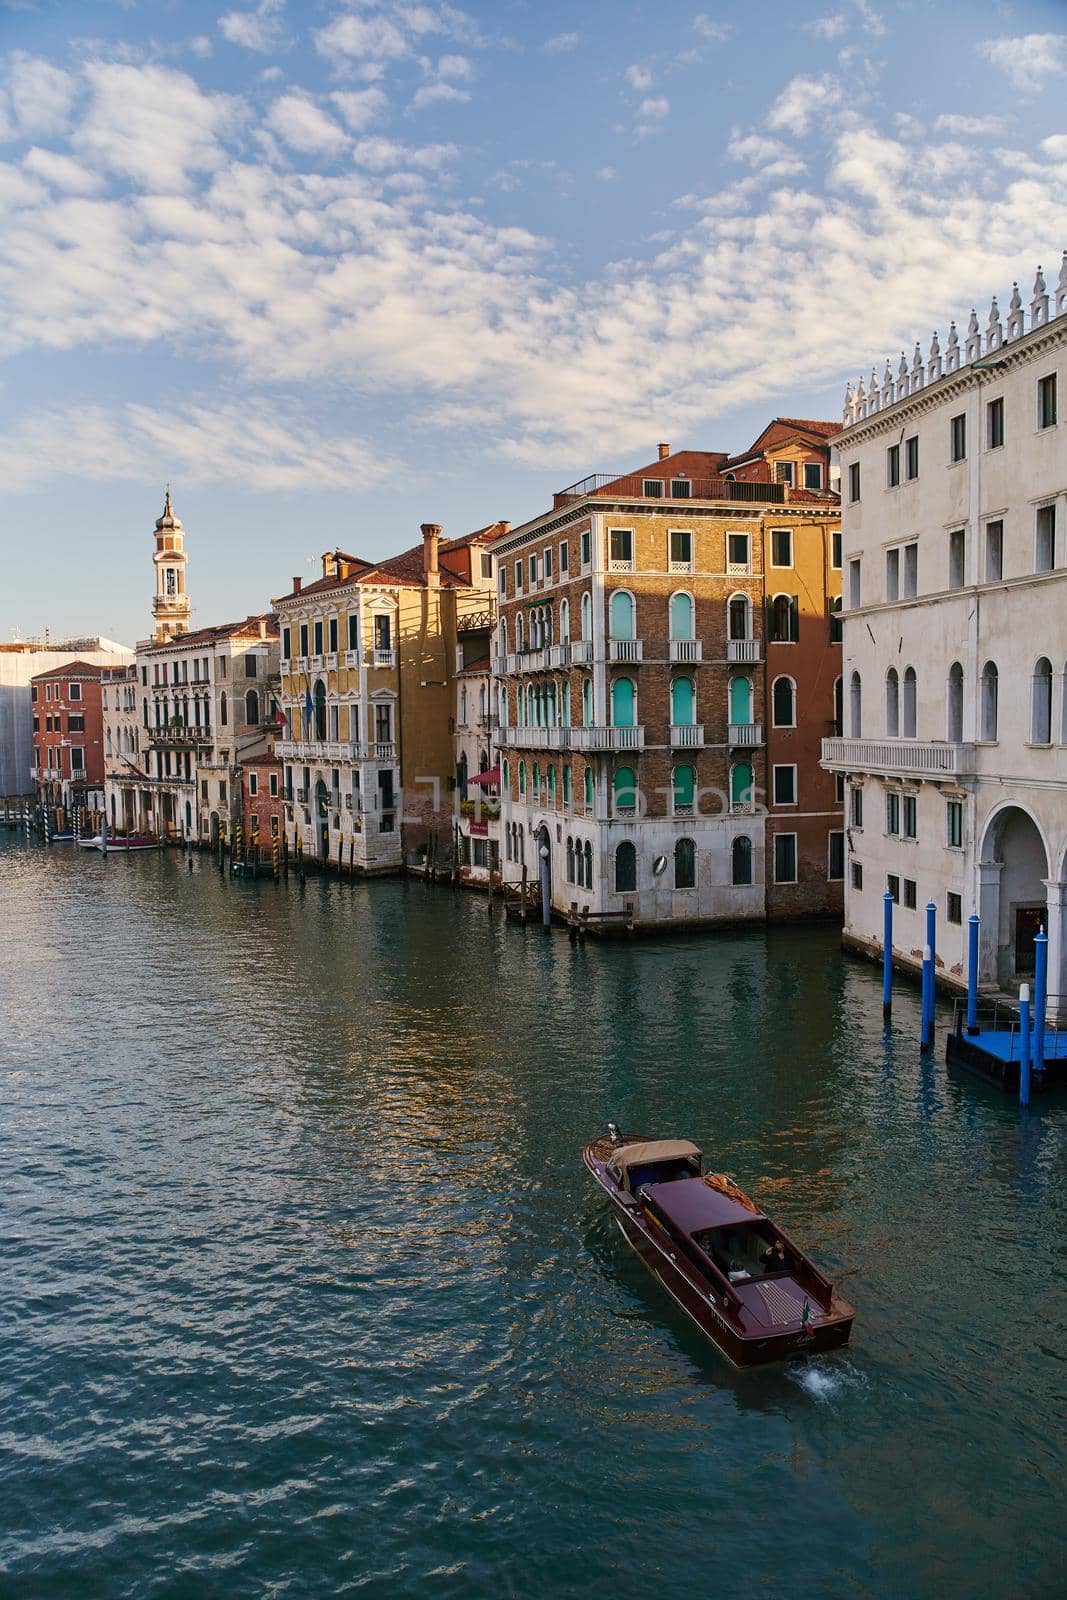 Venice, Italy - 10.12.2021: Beautiful view of famous Grand Canal in Venice, Italy by driver-s